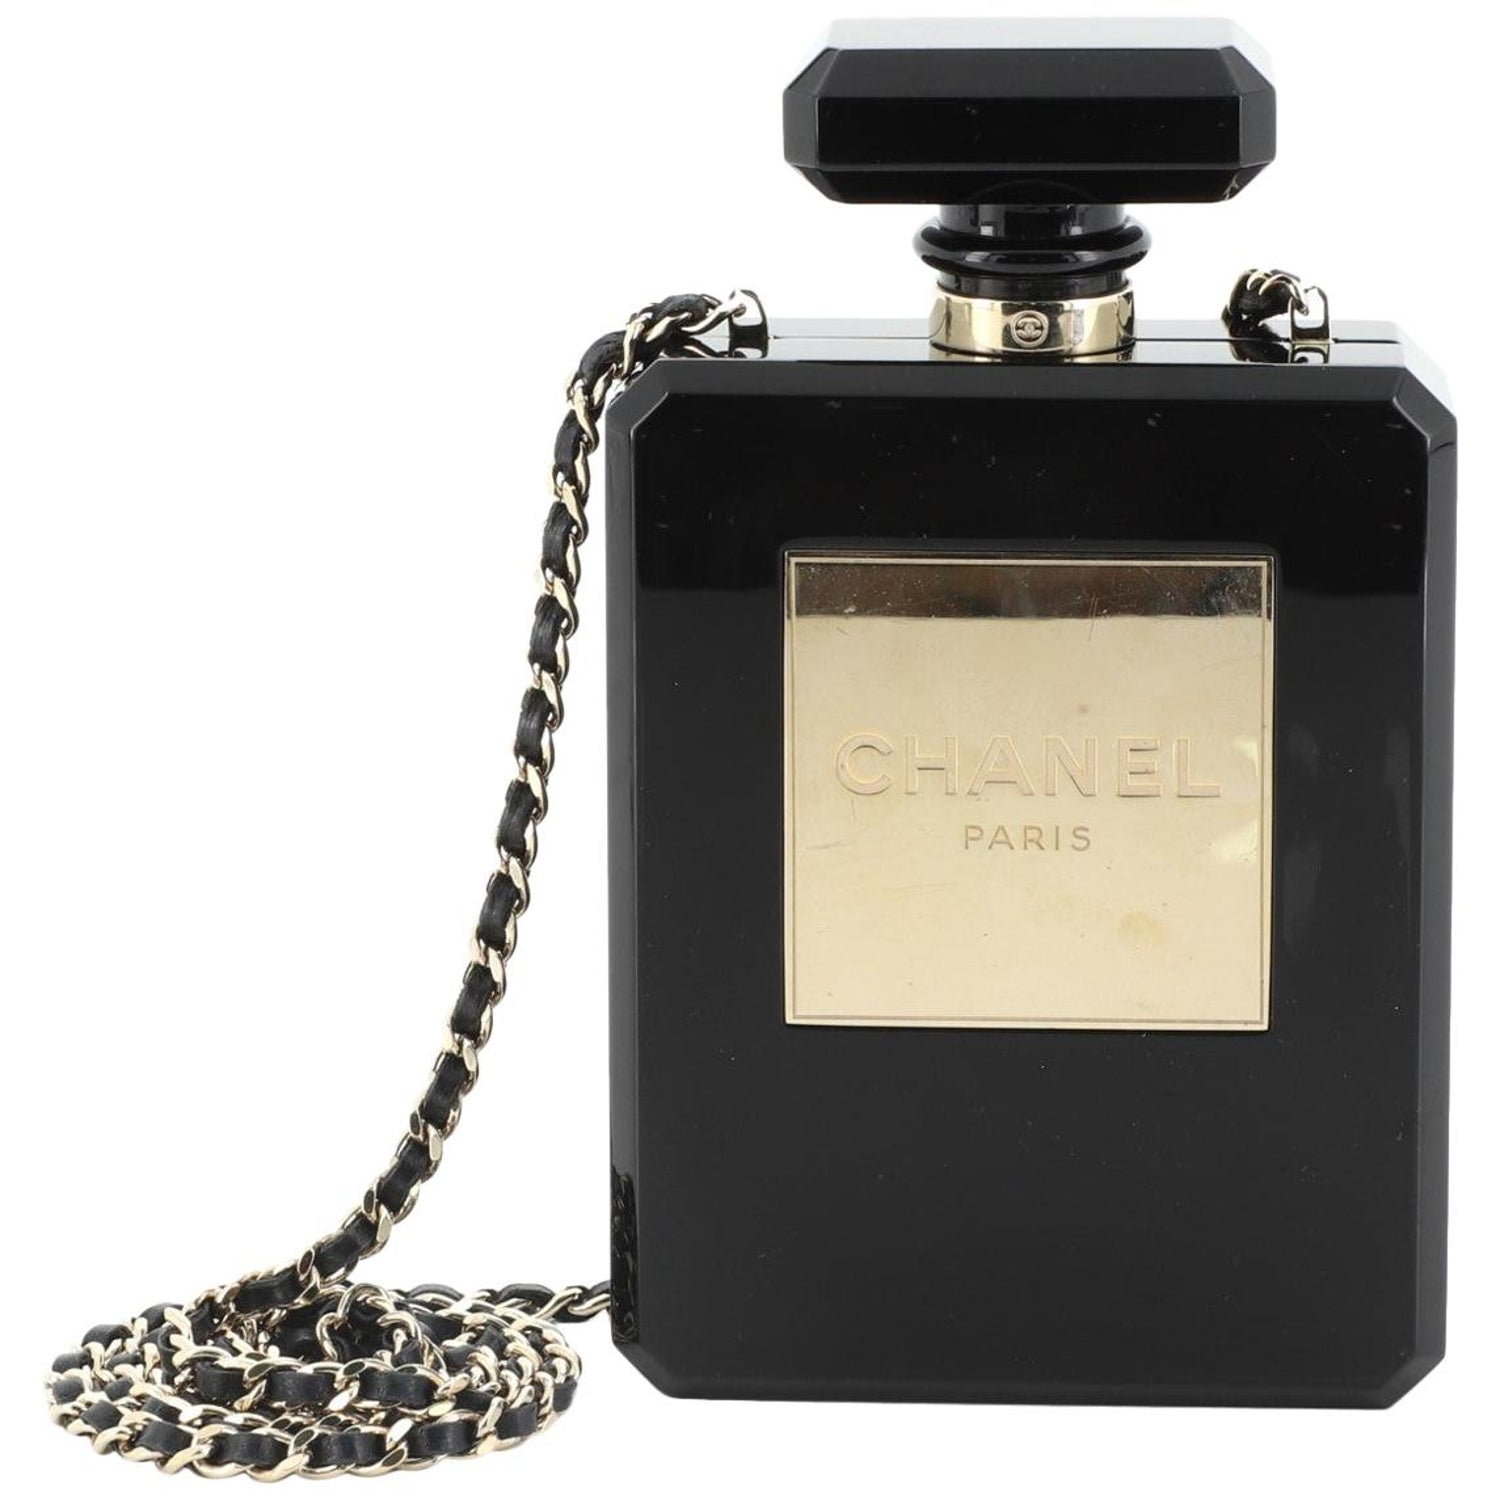 Chanel Perfume Bottle Minaudiere - 4 For Sale on 1stDibs